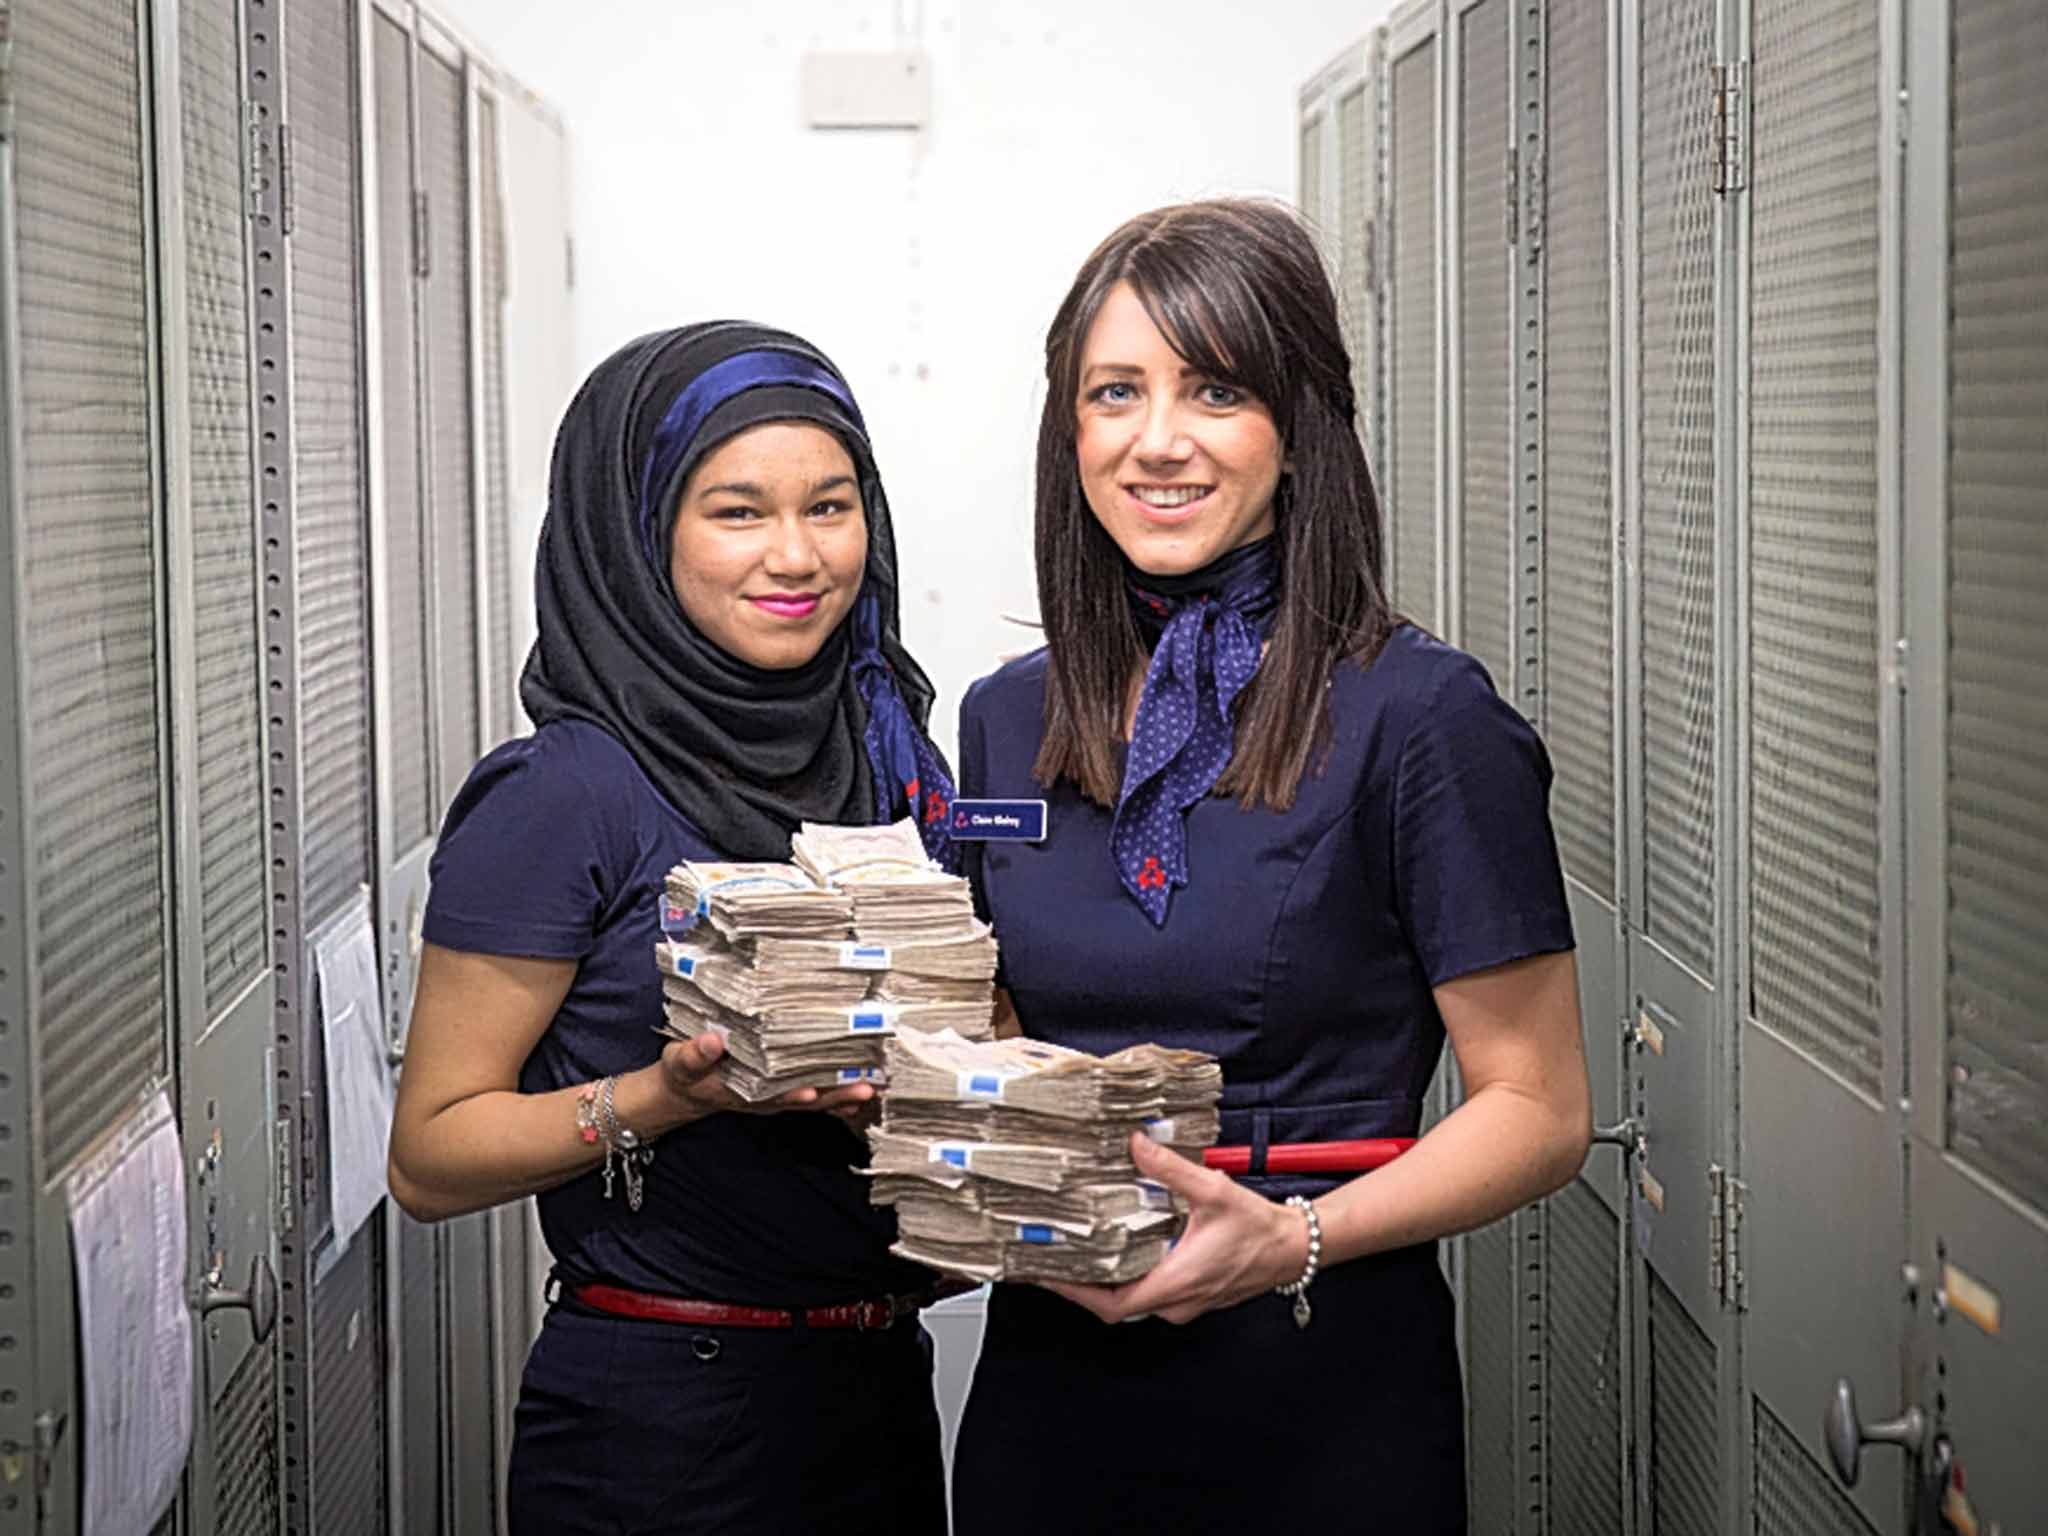 Double take: NatWest staff Sarah Iqbal and Claire Blakey